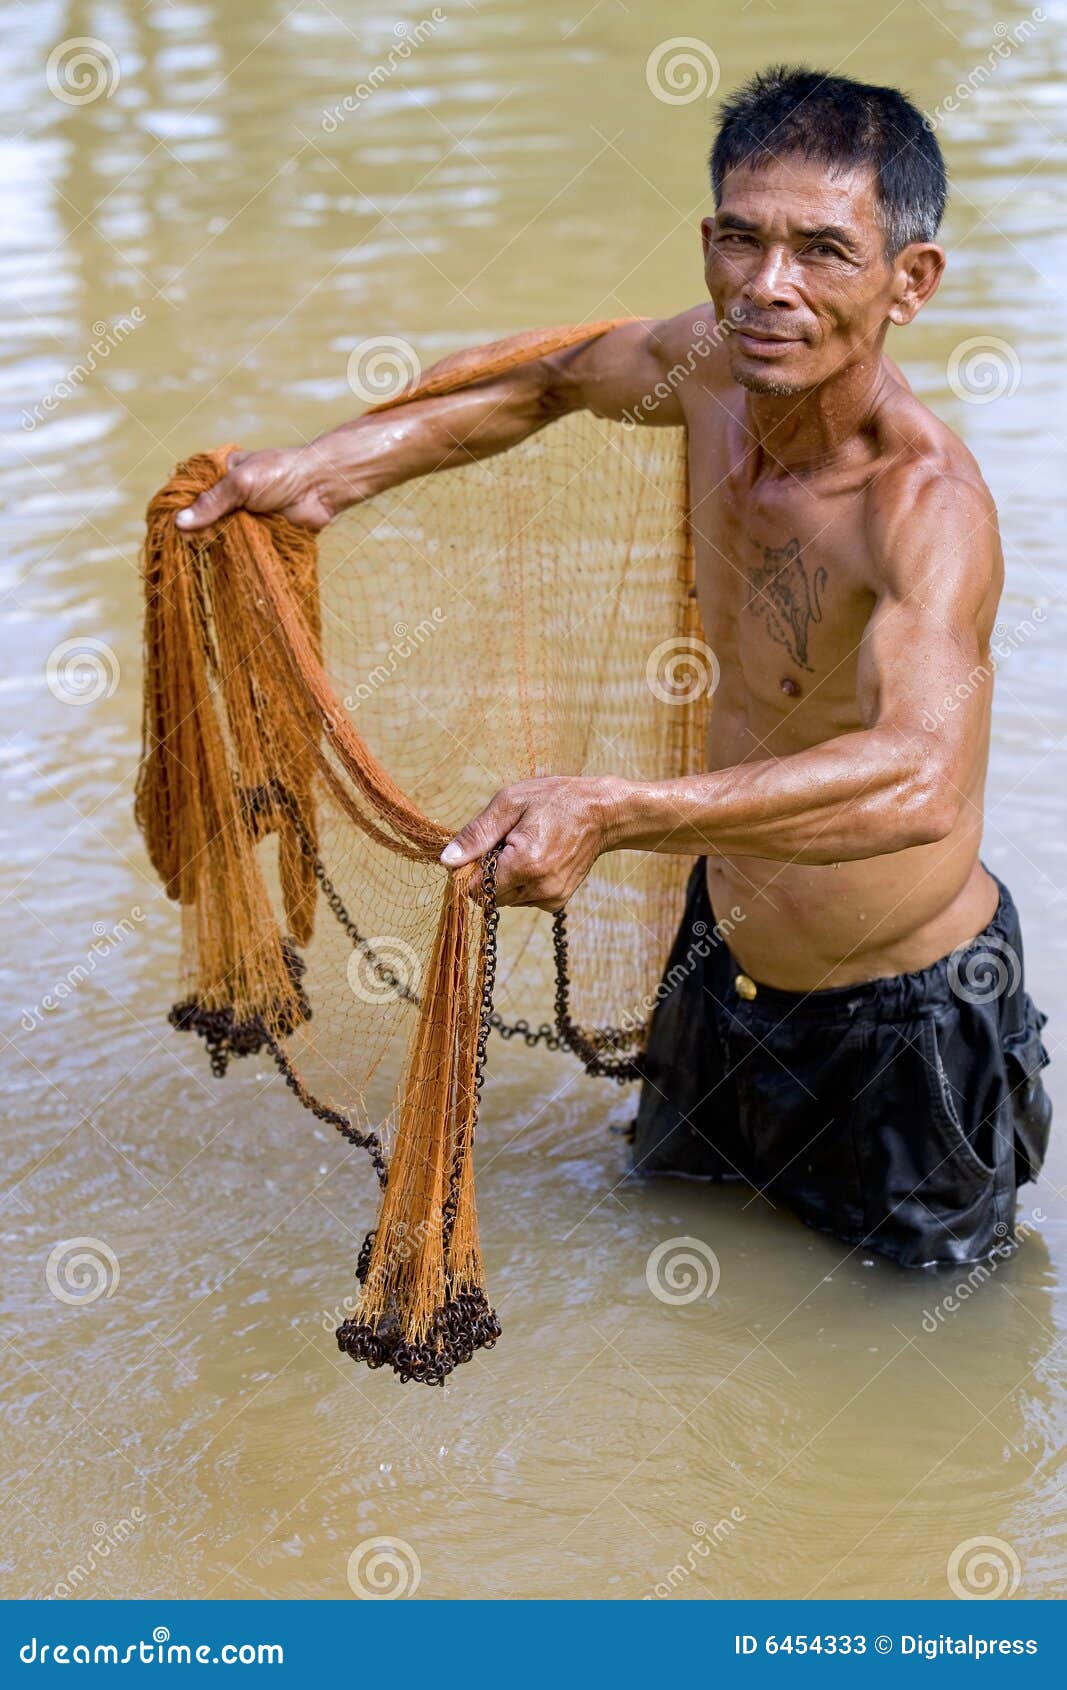 Fisherman of Thailand with Throw Net Stock Image - Image of people,  catching: 6454333